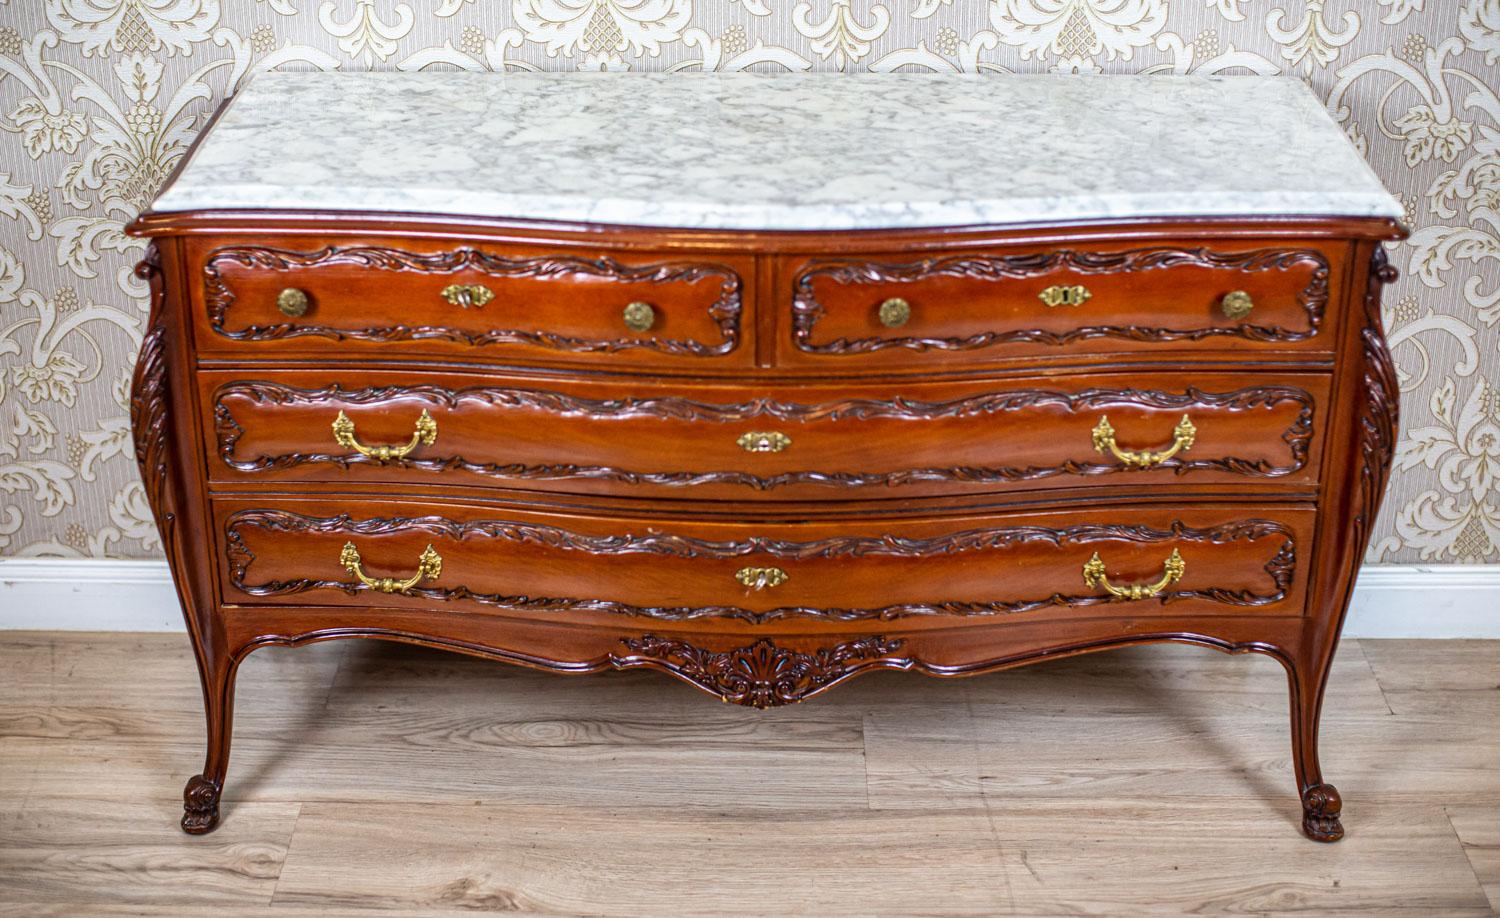 Decorative Beech Dresser From the Mid. 20th Century with Marble Top

The corpus of the piece of furniture hides four drawers locked with a key.
The dresser is topped with a marble wavy top.
The drawer fronts and the legs are decorated with floral